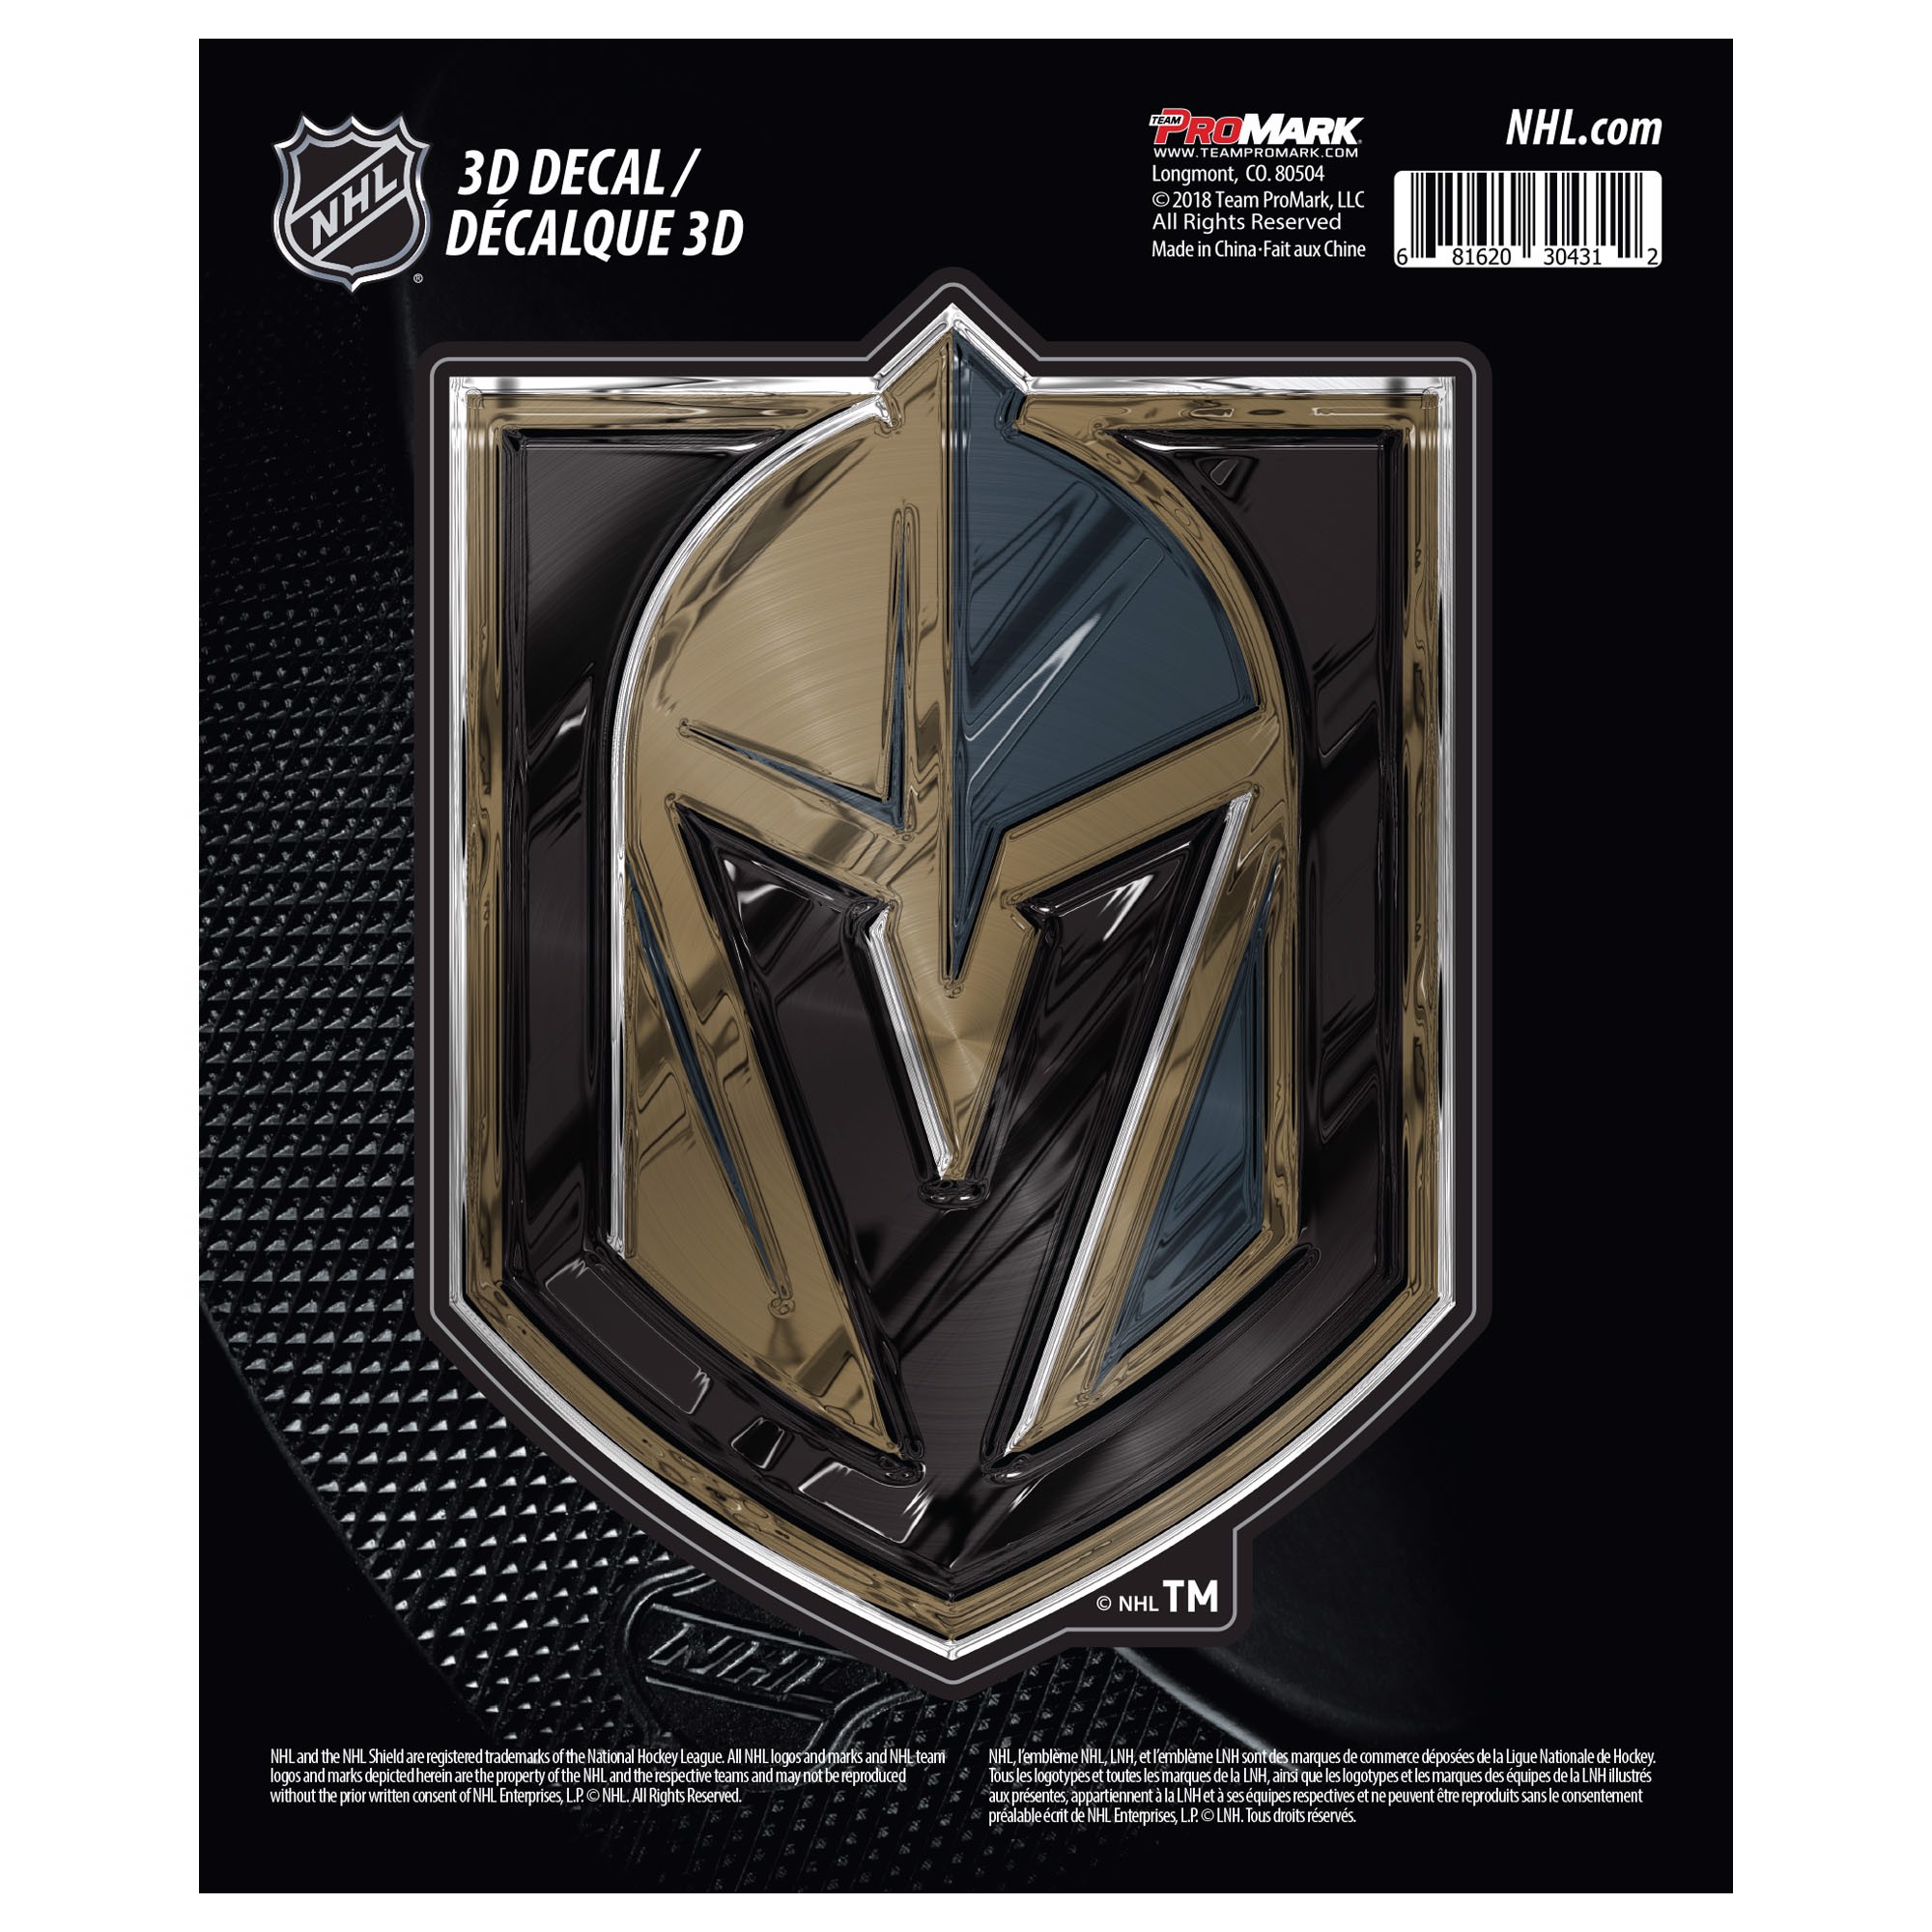 Vegas Golden Knights 2023 Stanley Cup Champions 5 Inch Die Cut Decal Sticker,  Flat Vinyl, Clear Adhesive Backing 